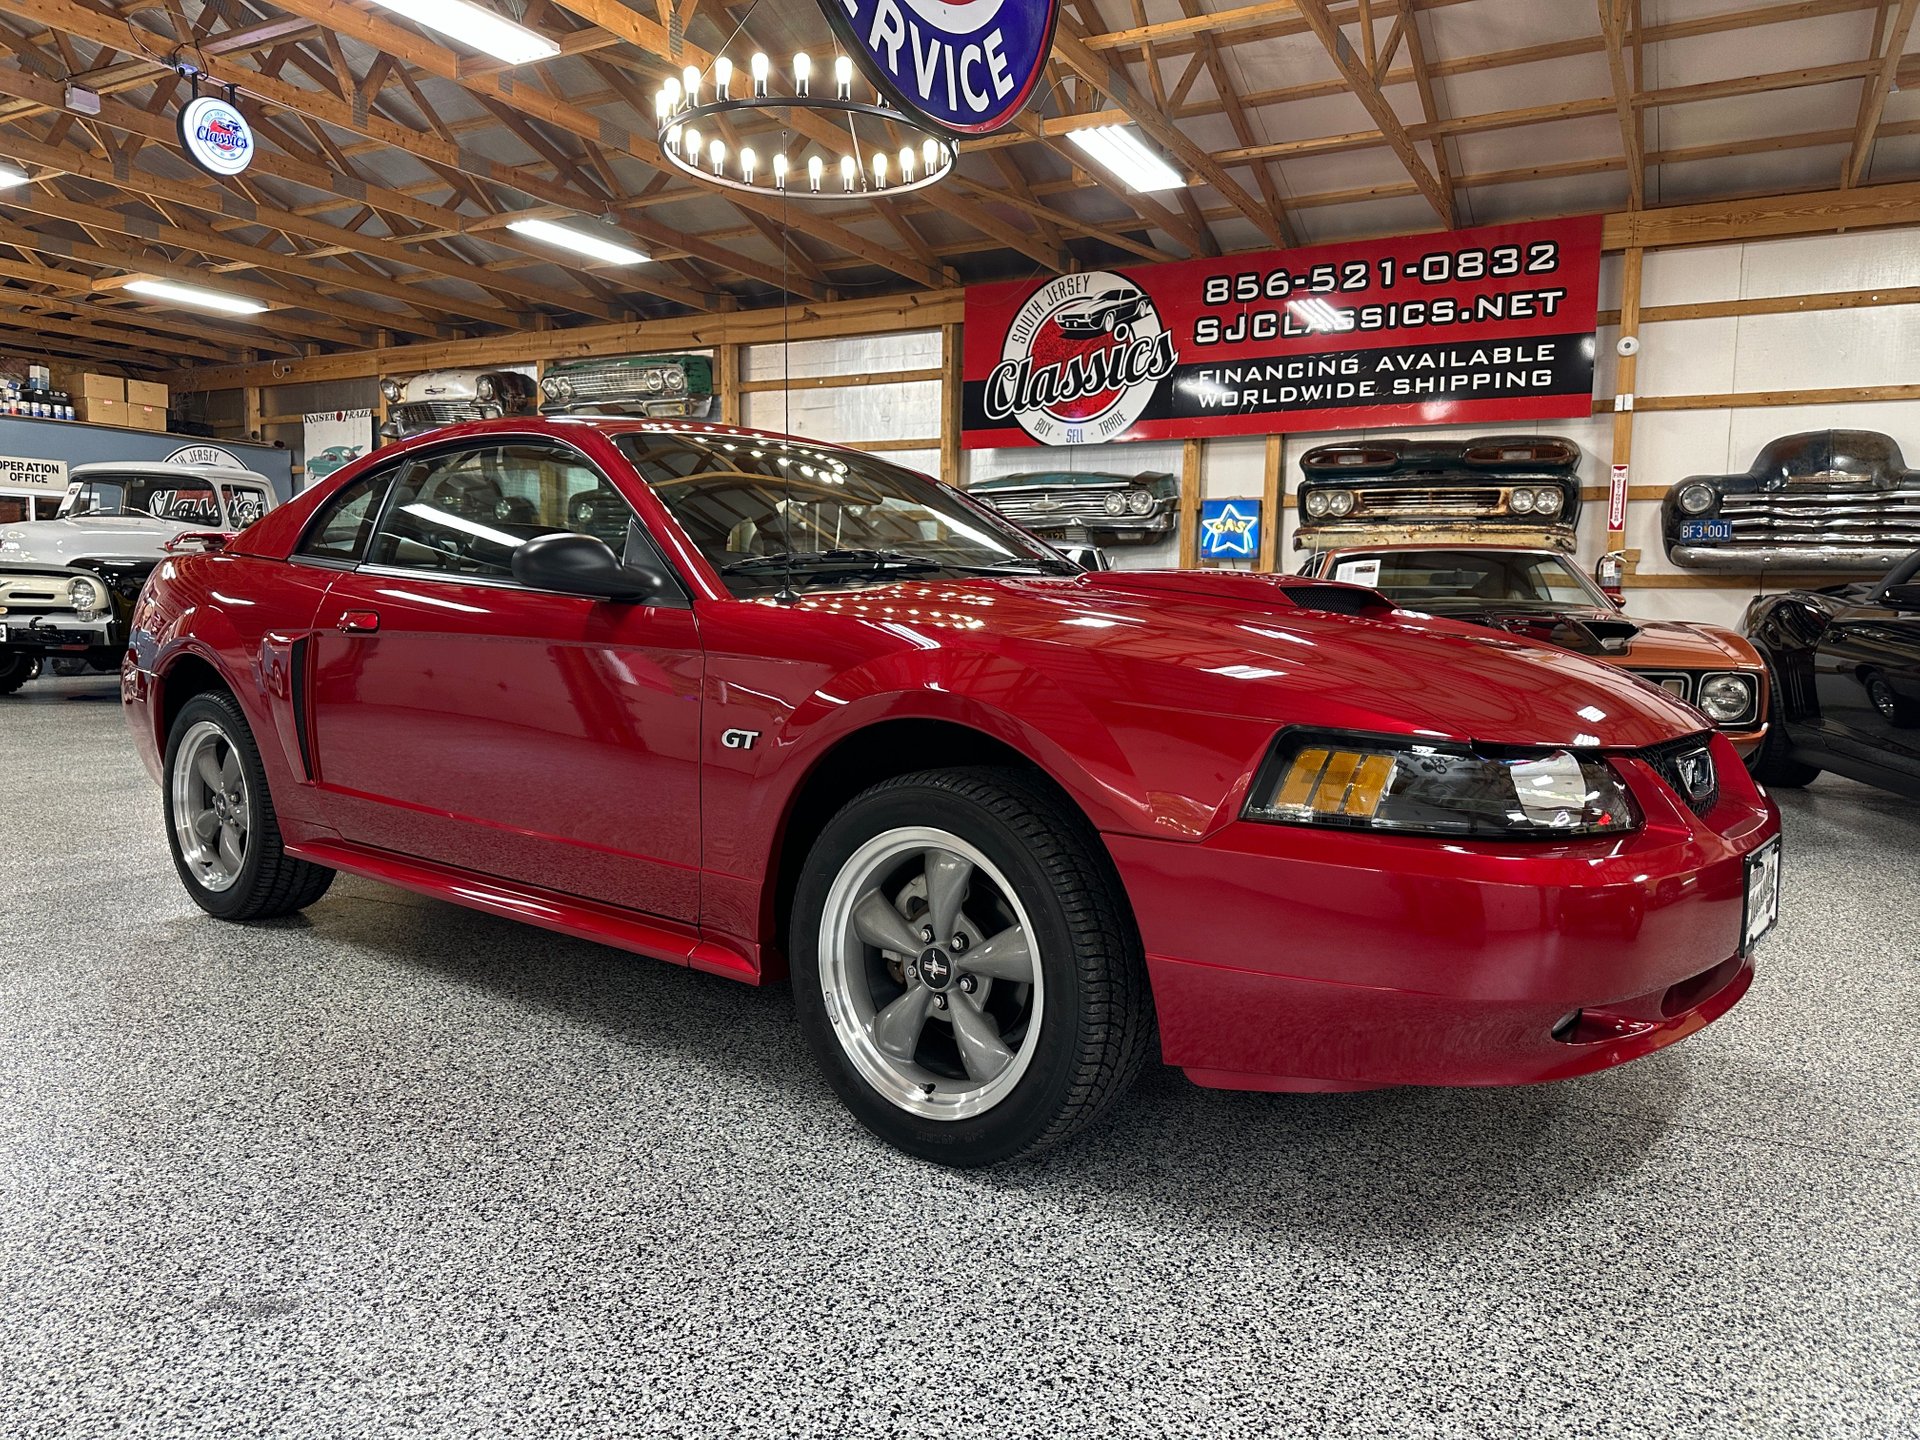 2002 Ford Mustang | South Jersey Classics